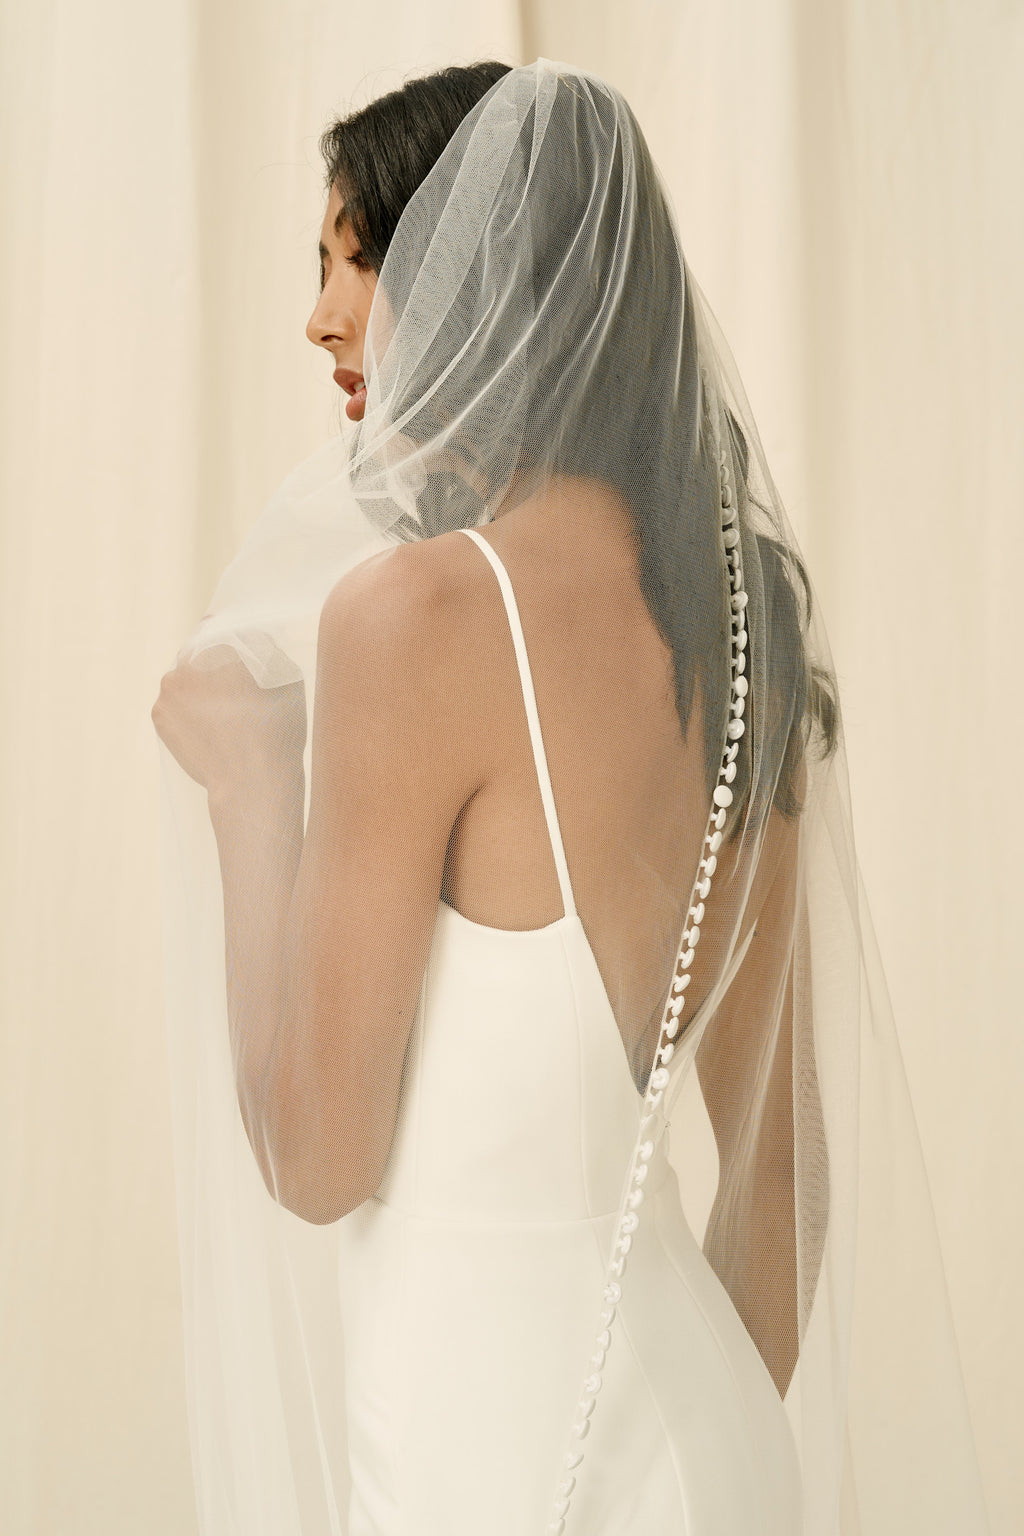 Bridal veil with buttons